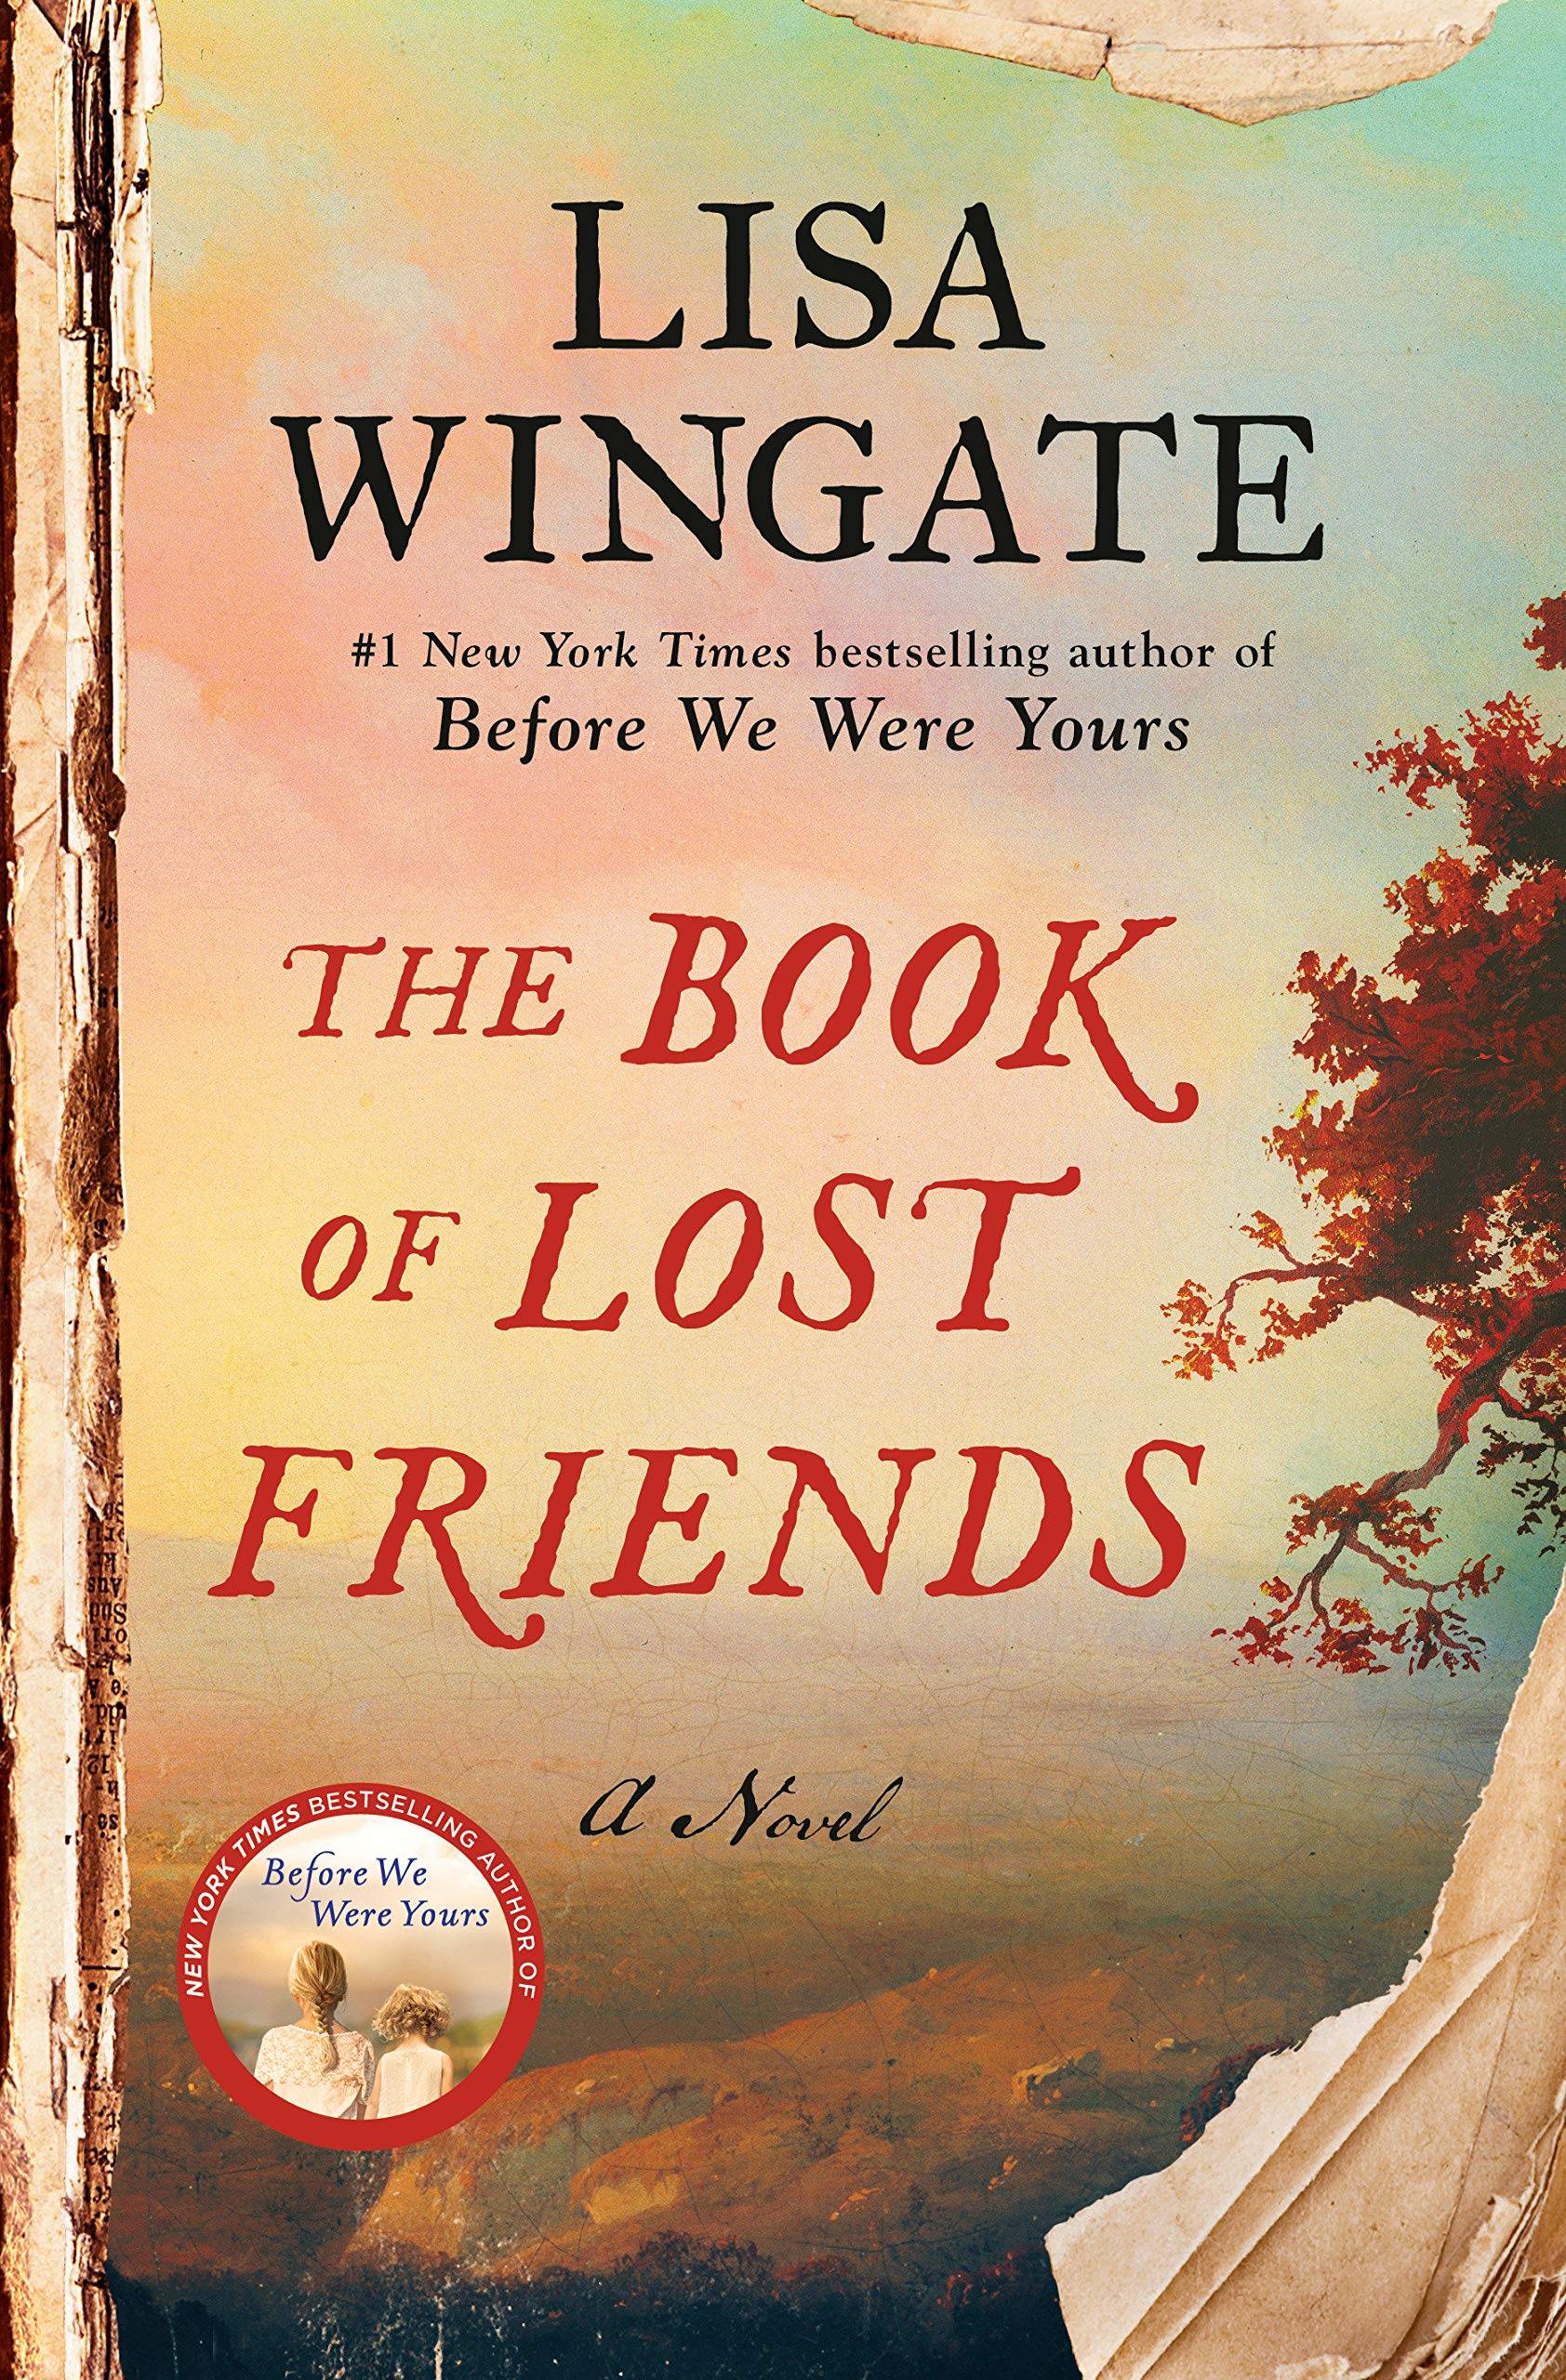 The Book of Lost Friends A Novel Hardcover of the Bestselling Author, Talking About Three Young Women Searching for Family Amid the Destruction of the Post–Civil War South